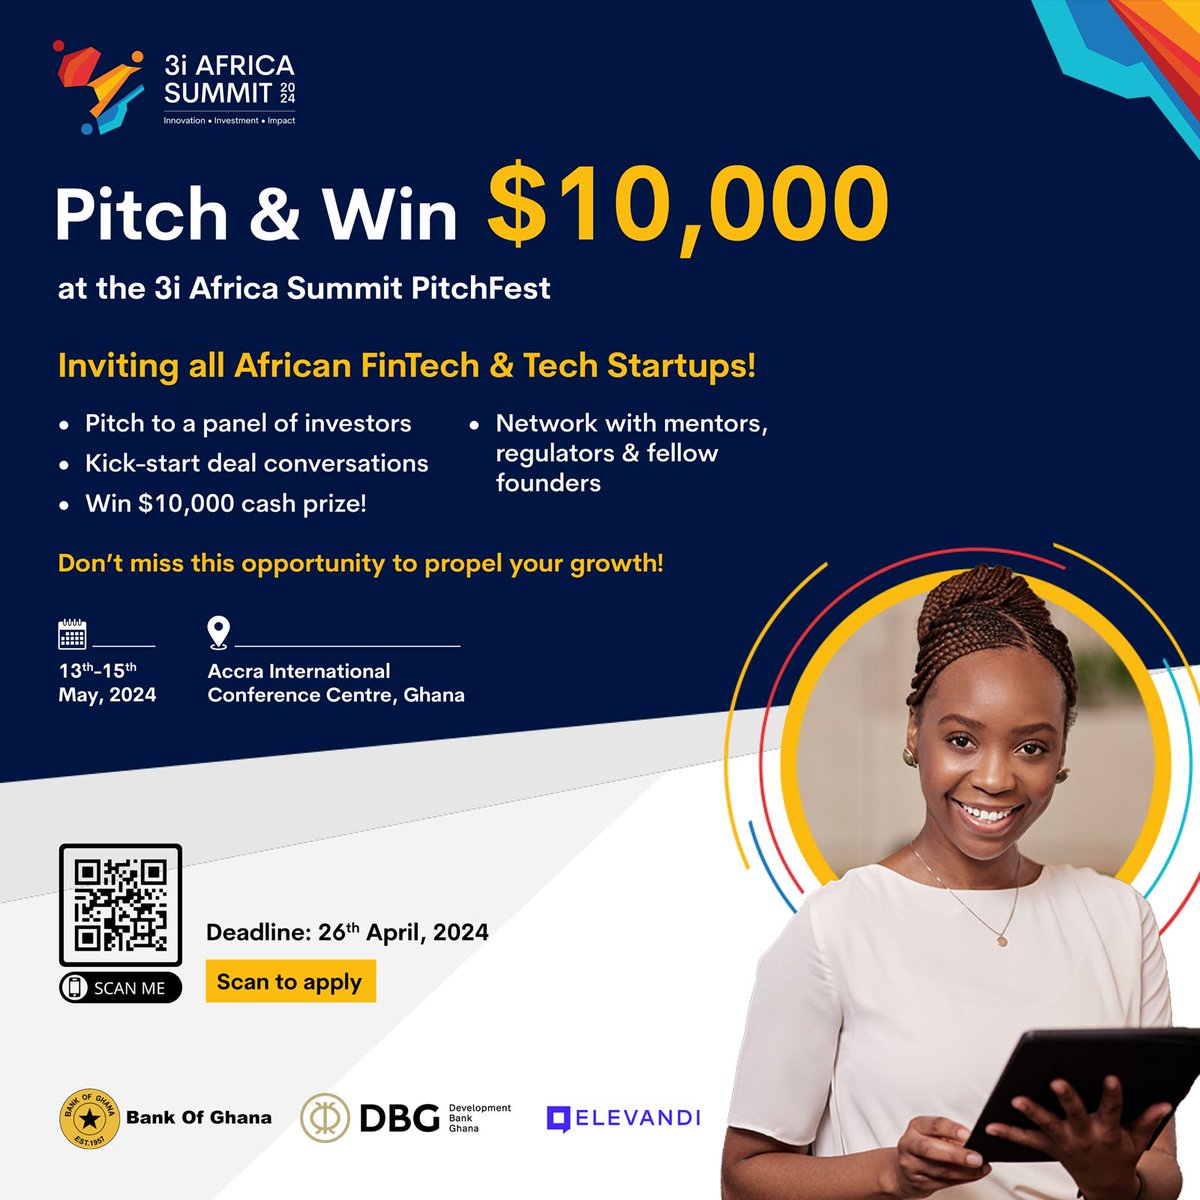 🚀 Calling all entrepreneurs and innovators! 

Stand a chance to win $10,000 and pitch your groundbreaking ideas to our esteemed panel of judges.

 Register now 3i.swoogo.com/3iafricasummit… and take your shot at the PitchFest of a lifetime! 

#3iAfricaSummit